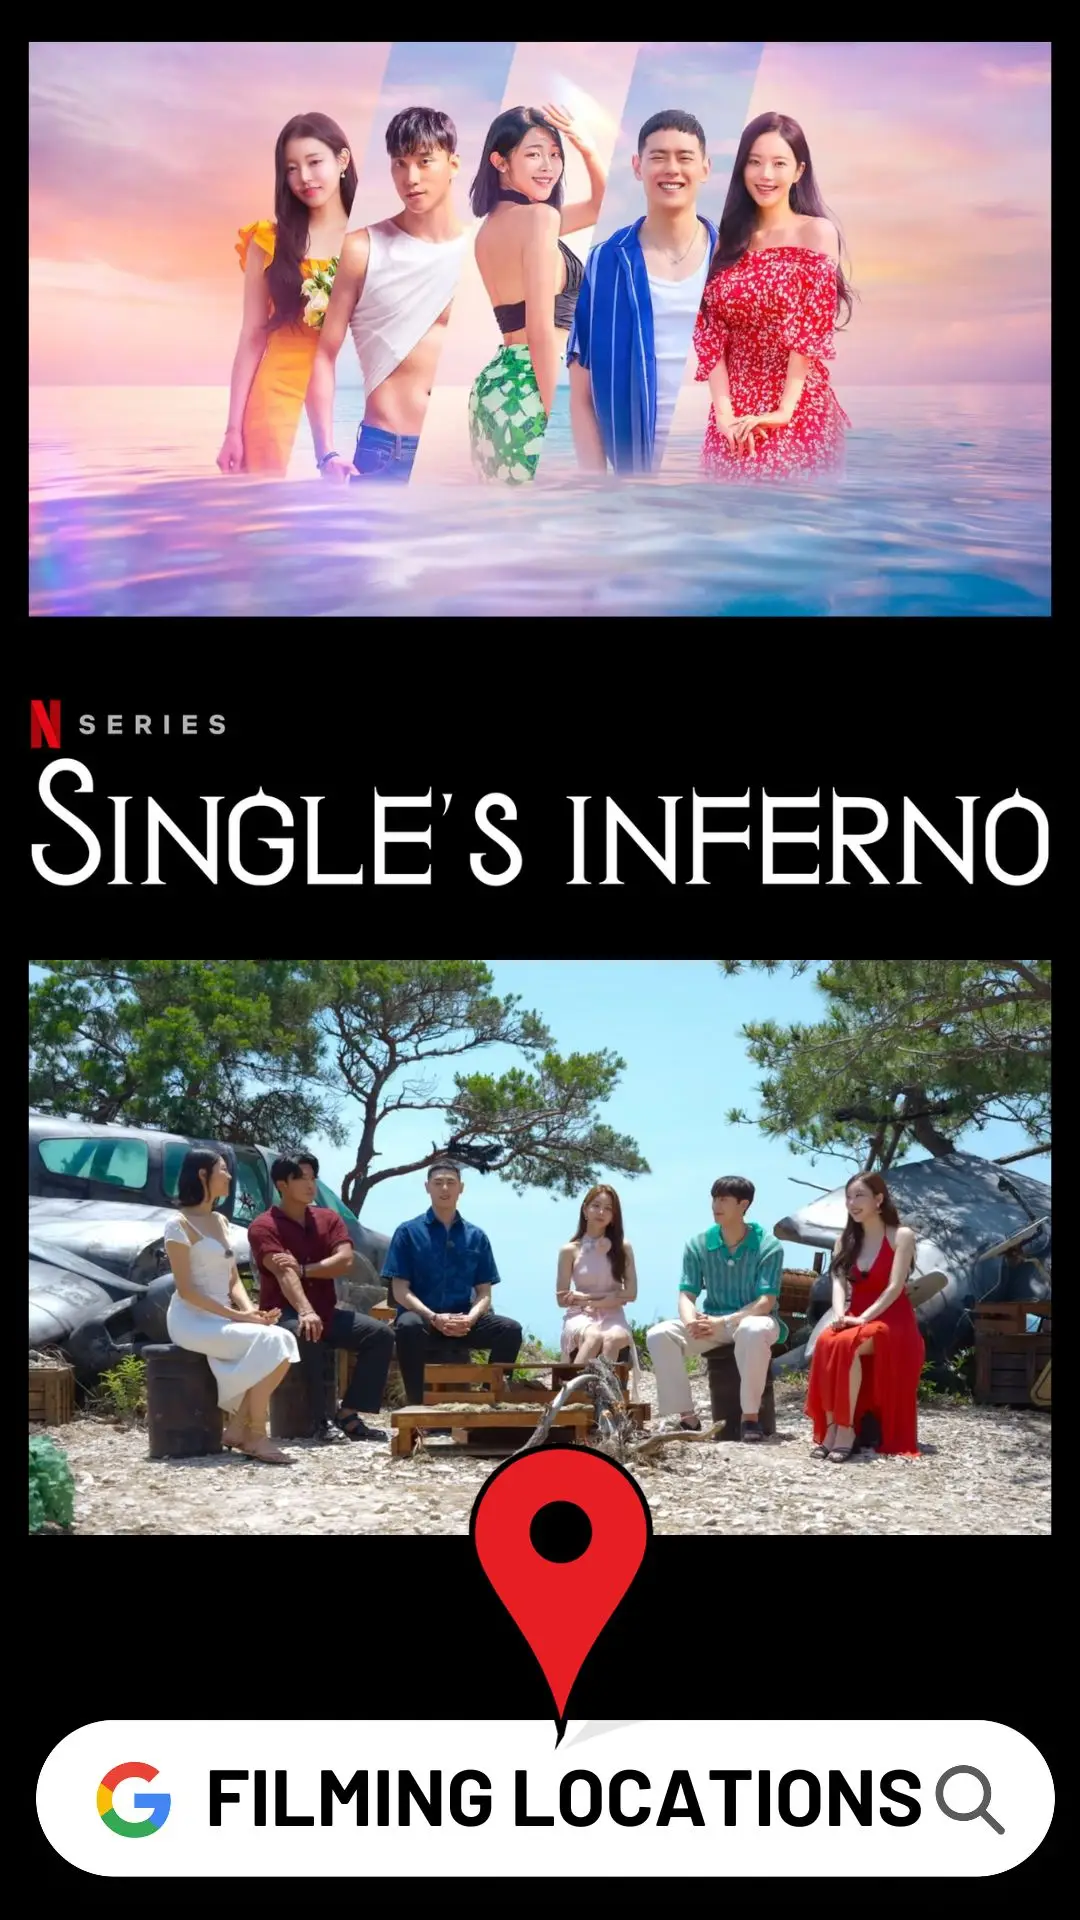 Singles Inferno 3 Filming Locations